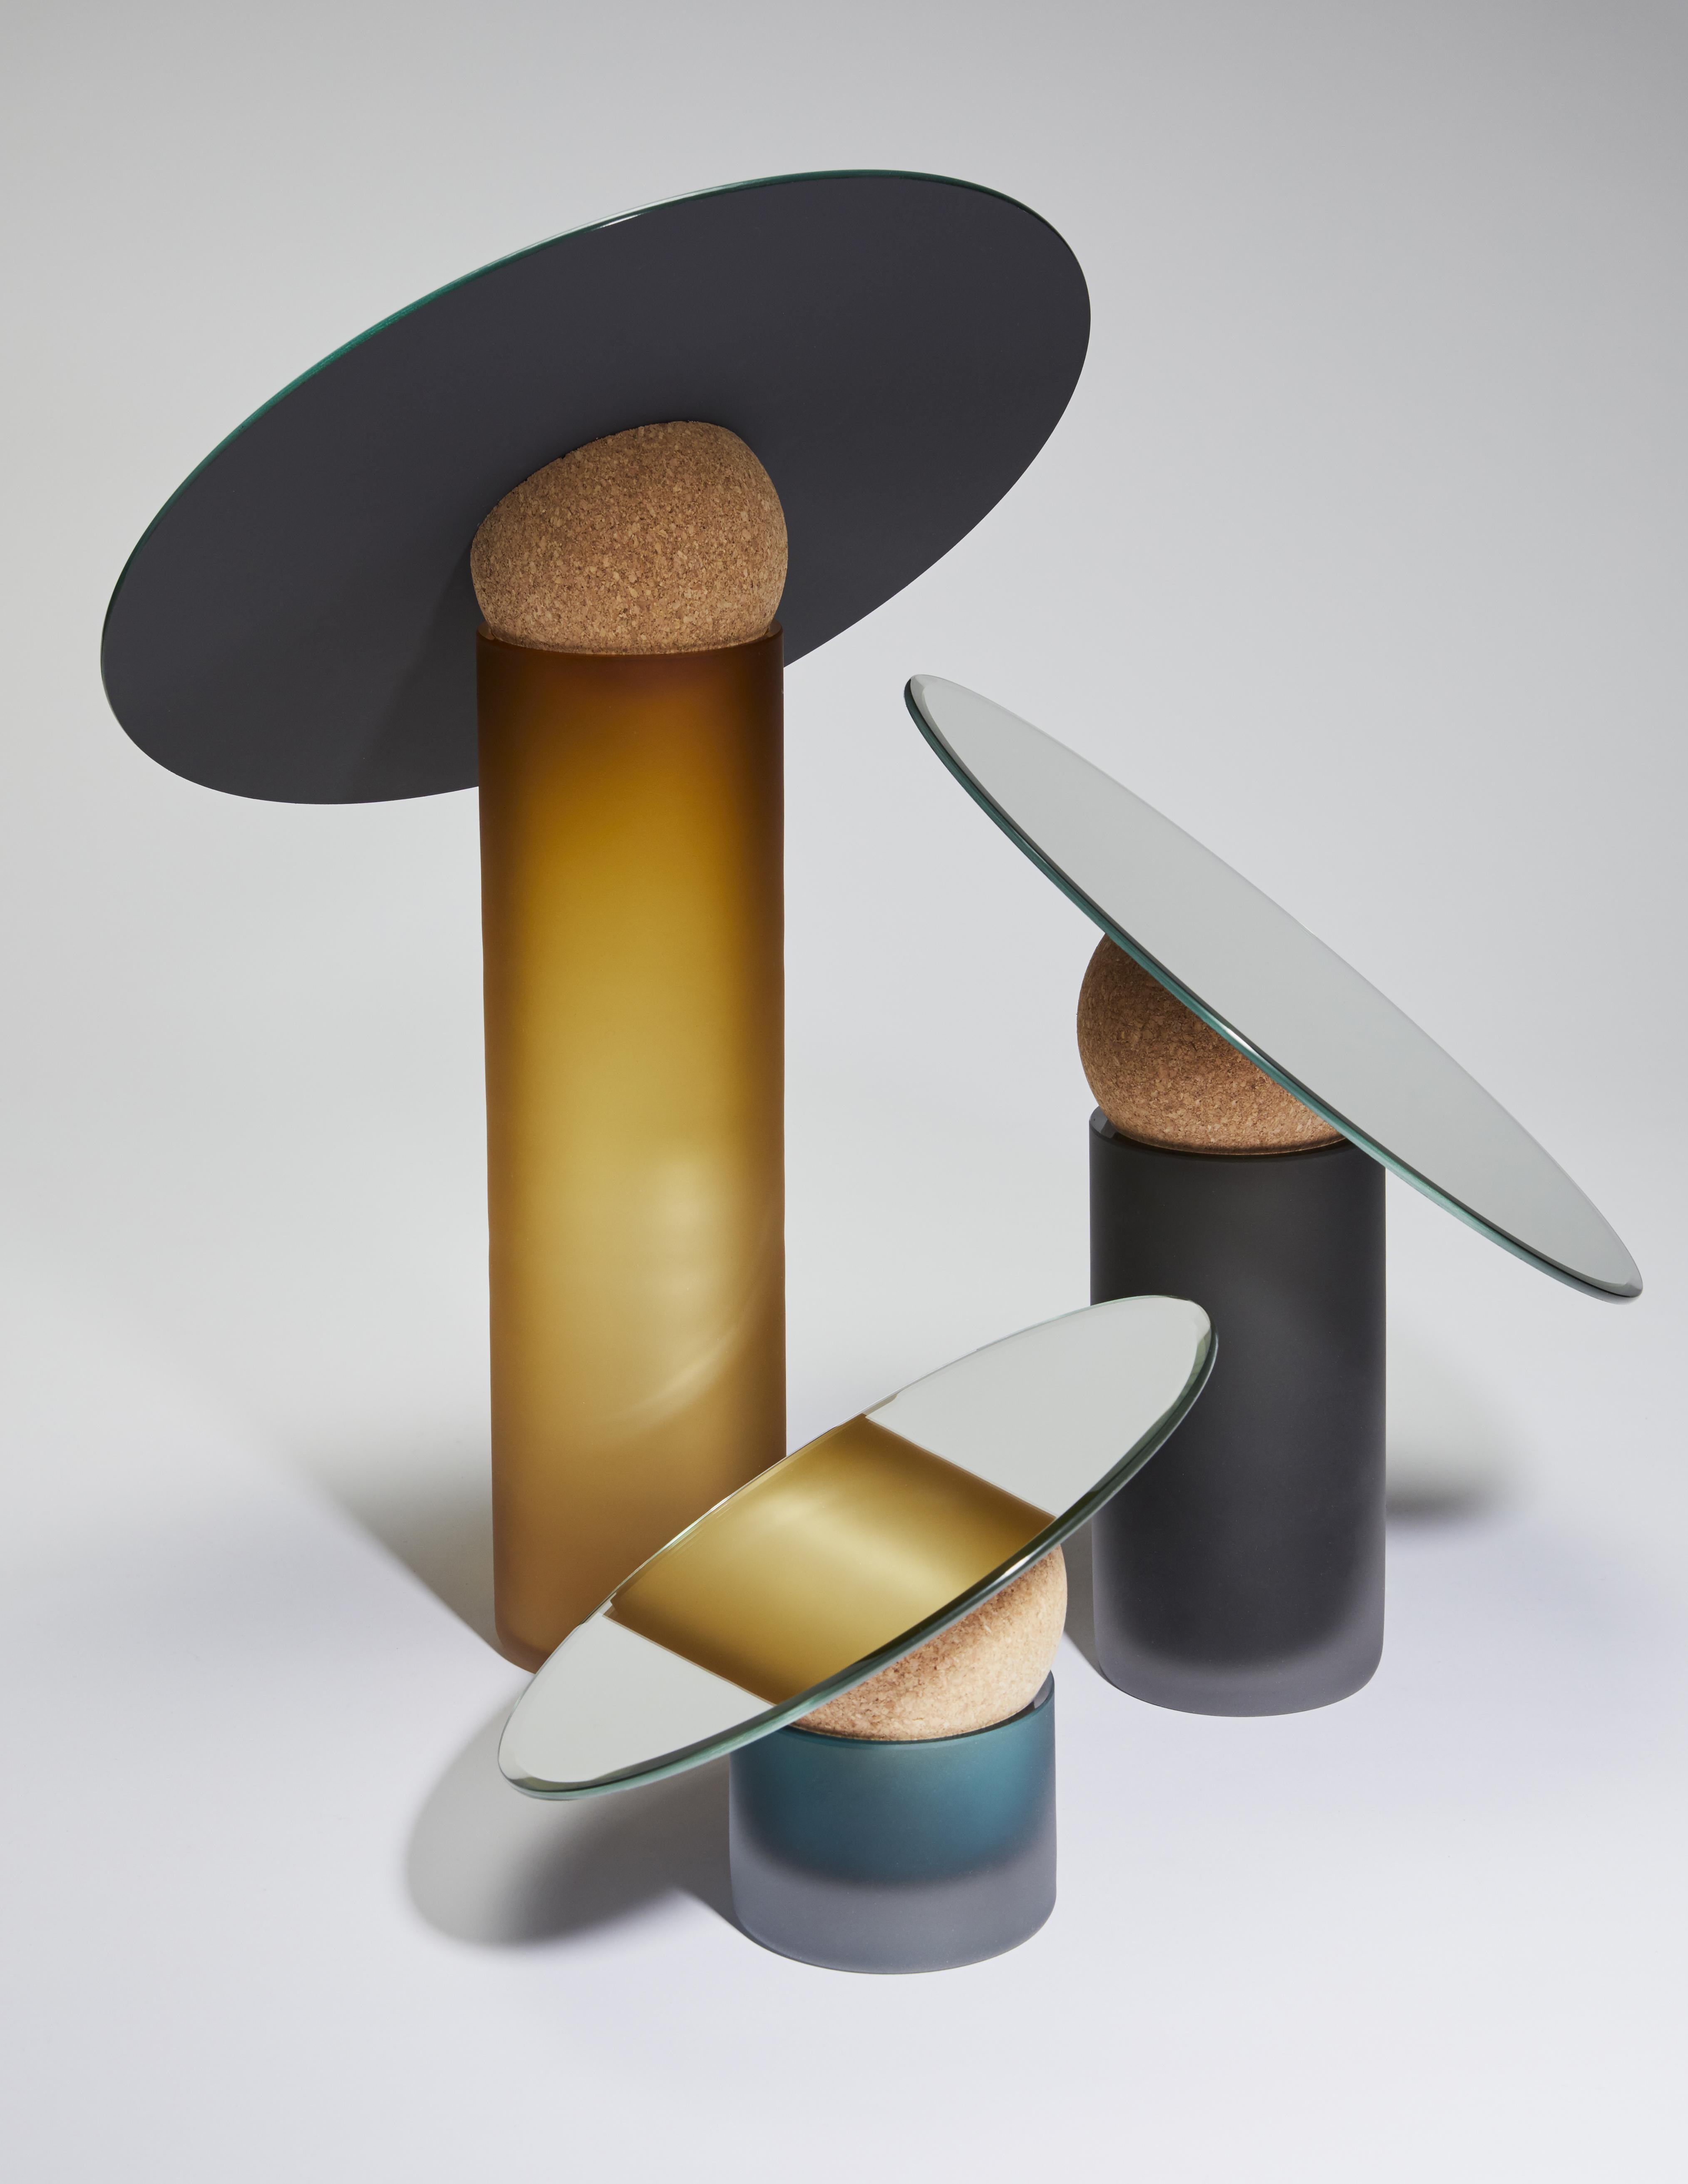 A set of 3 astra table mirrors by Clemence Birot
Dimensions: Ø 34 x 50 cm; Ø 30 x 33 cm; Ø 24 x 20 cm.
Materials: mirror, glass, cork. 

Clemence Birot started her career in Copenhagen, Denmark, and discovered a design practice closely related